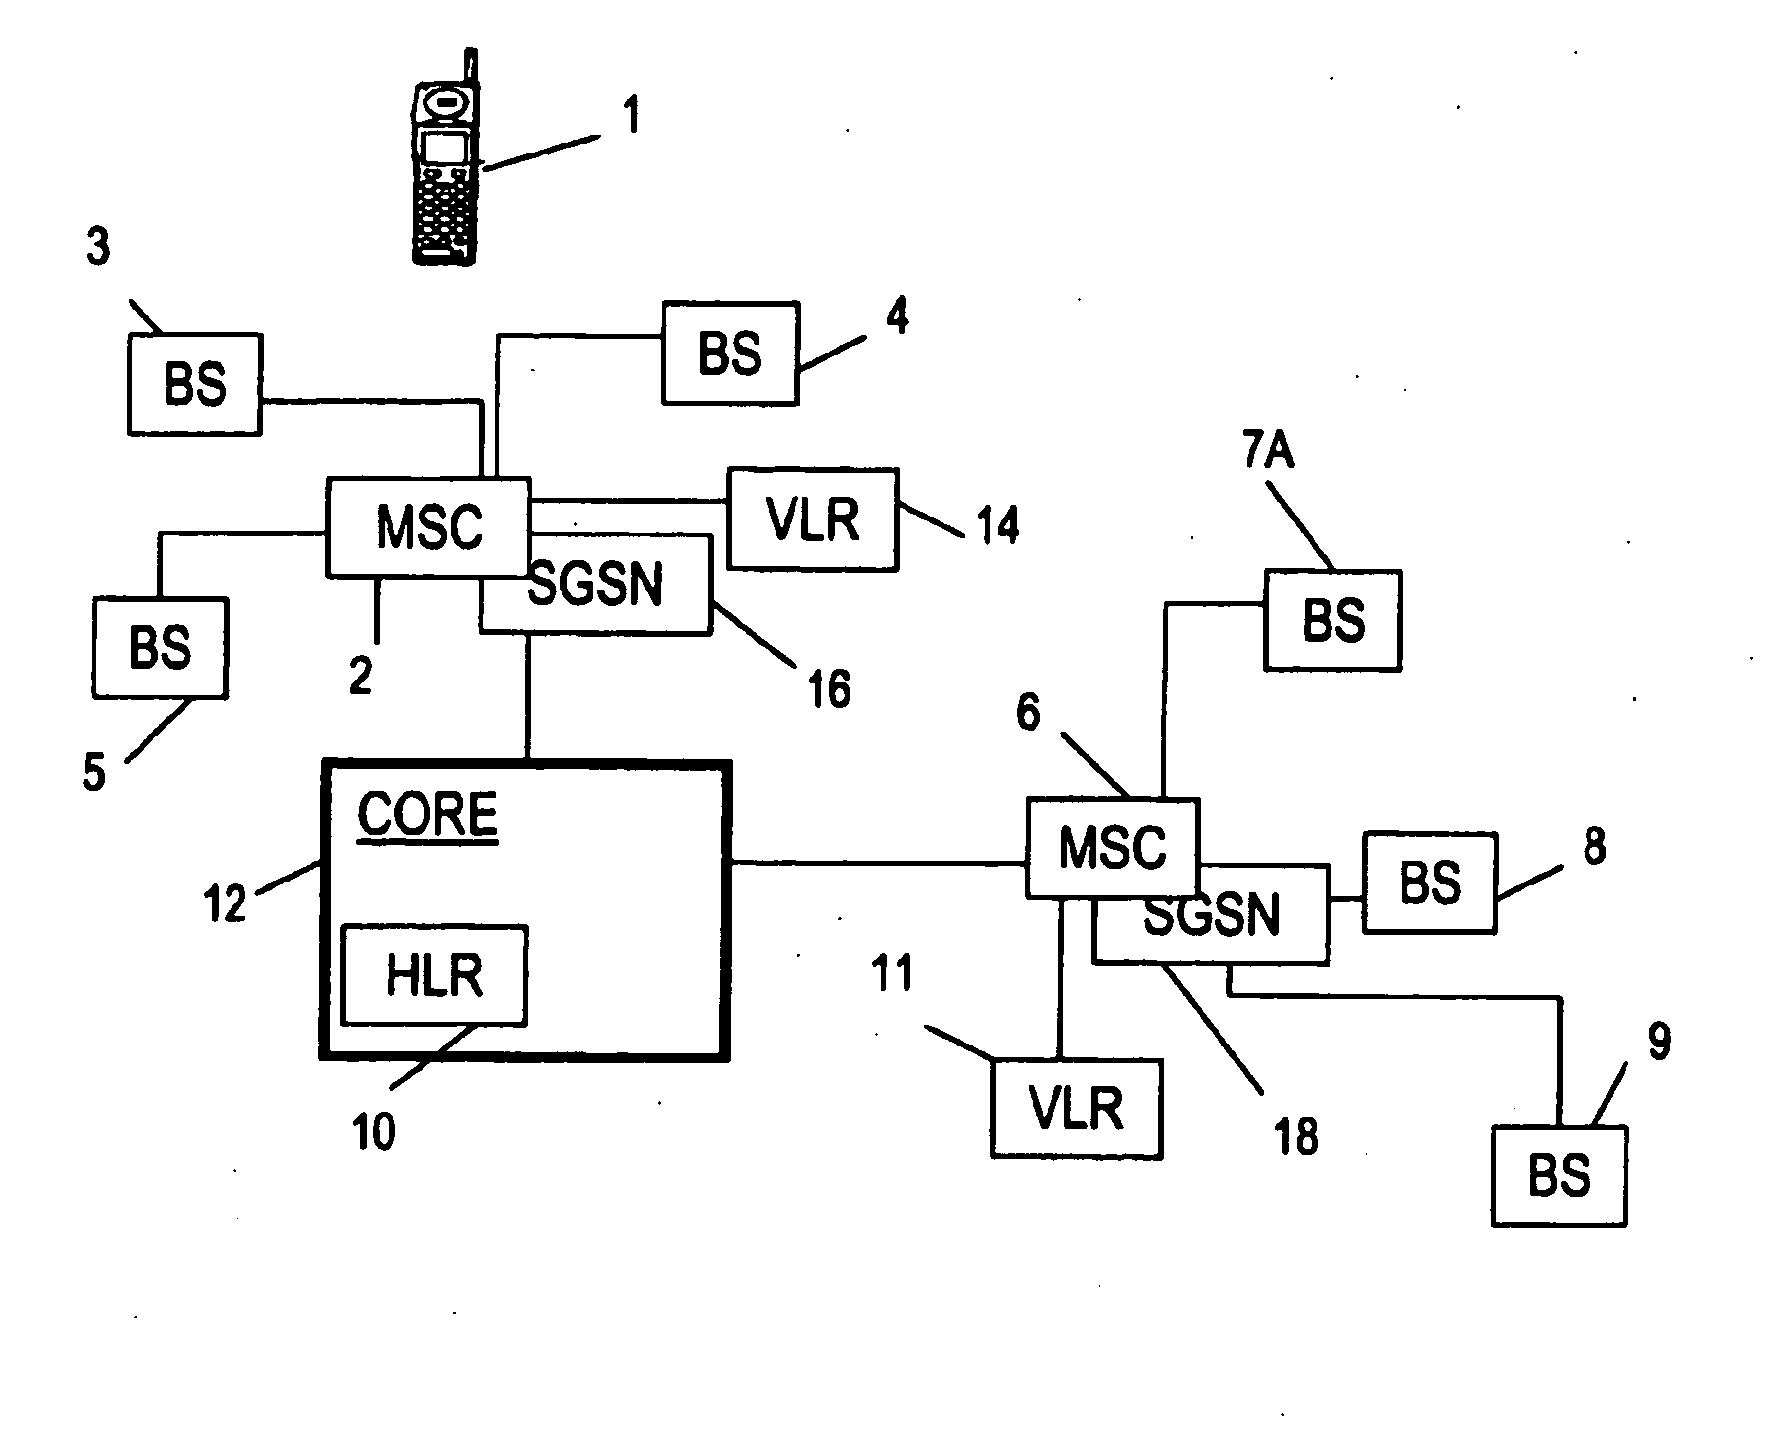 Controlling the use of access points in a telecommunication system